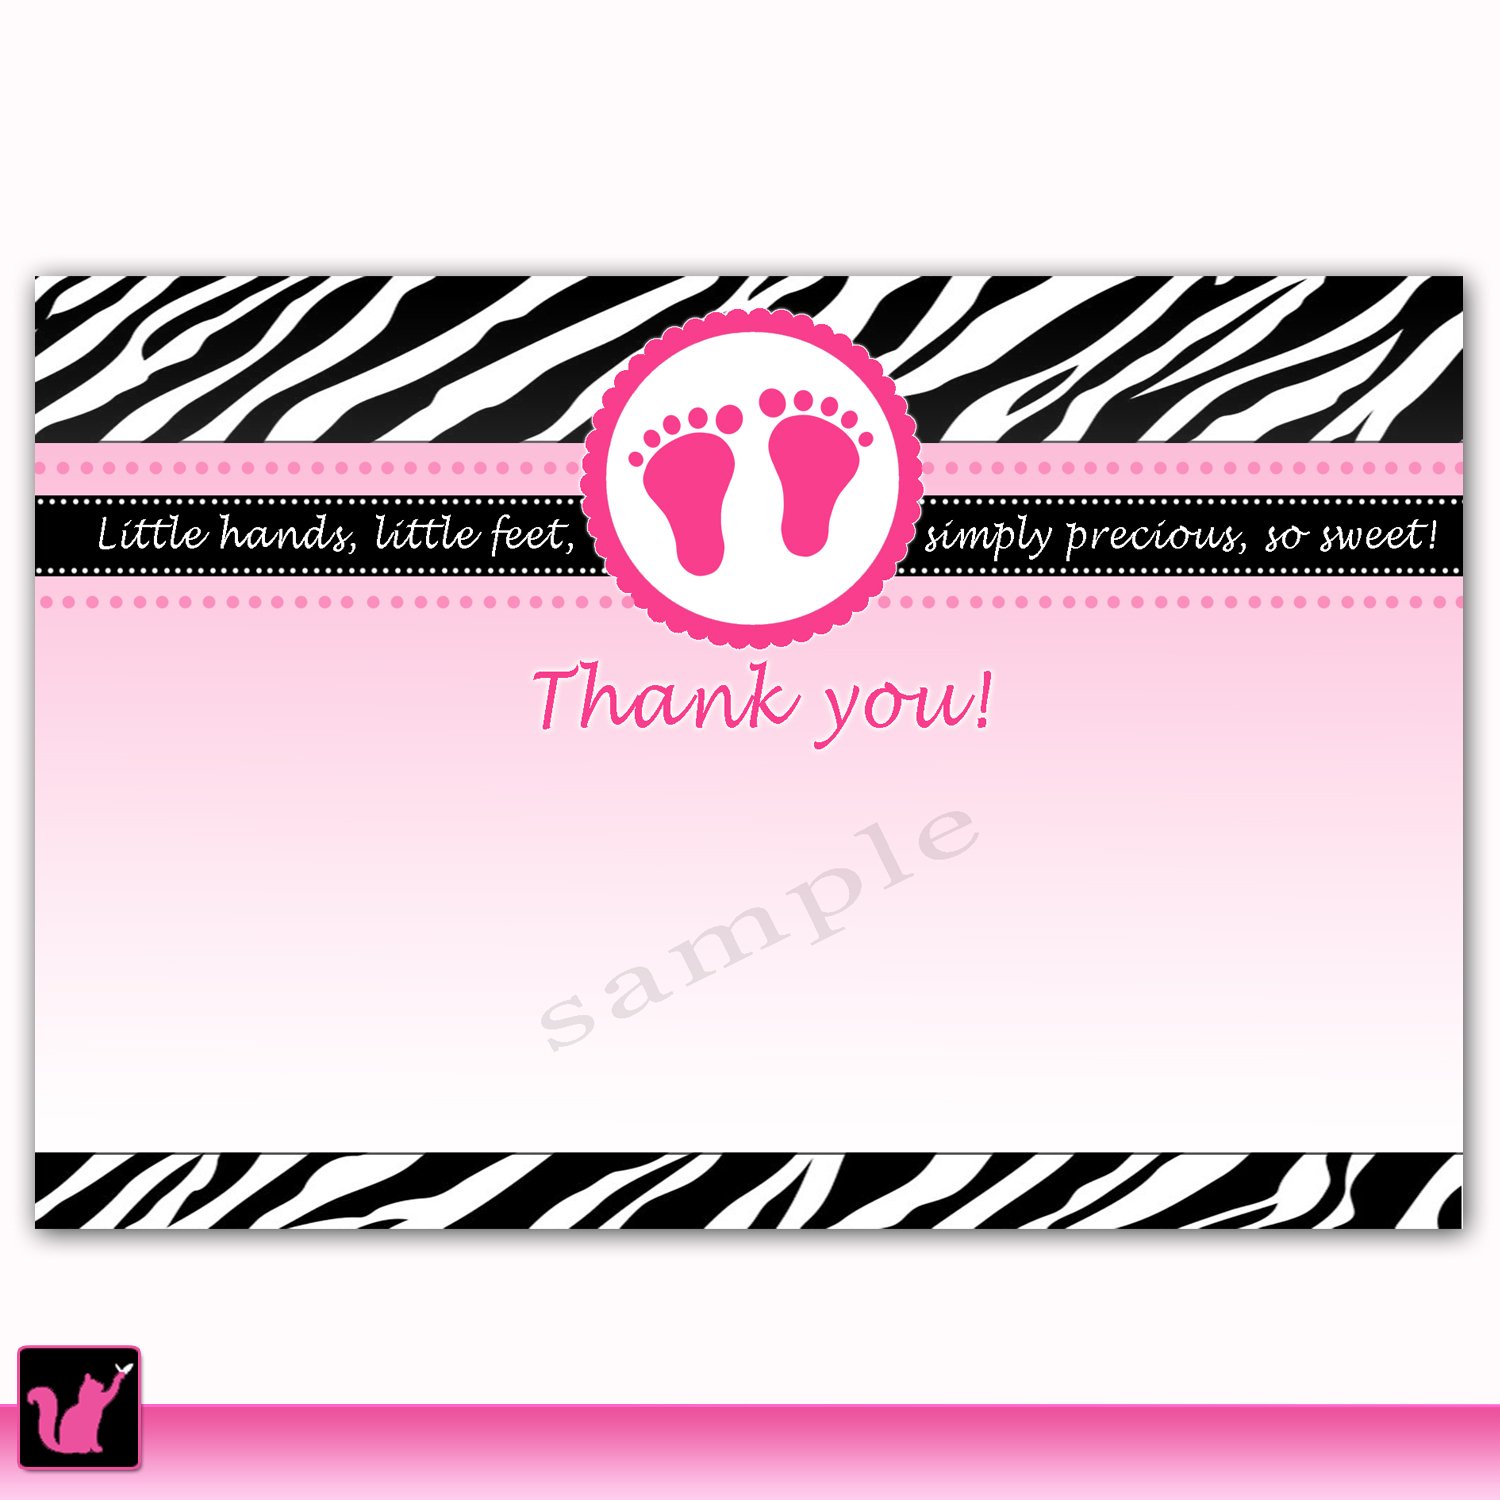 printable-baby-shower-blank-thank-you-card-note-hot-pink-white-black-zebra